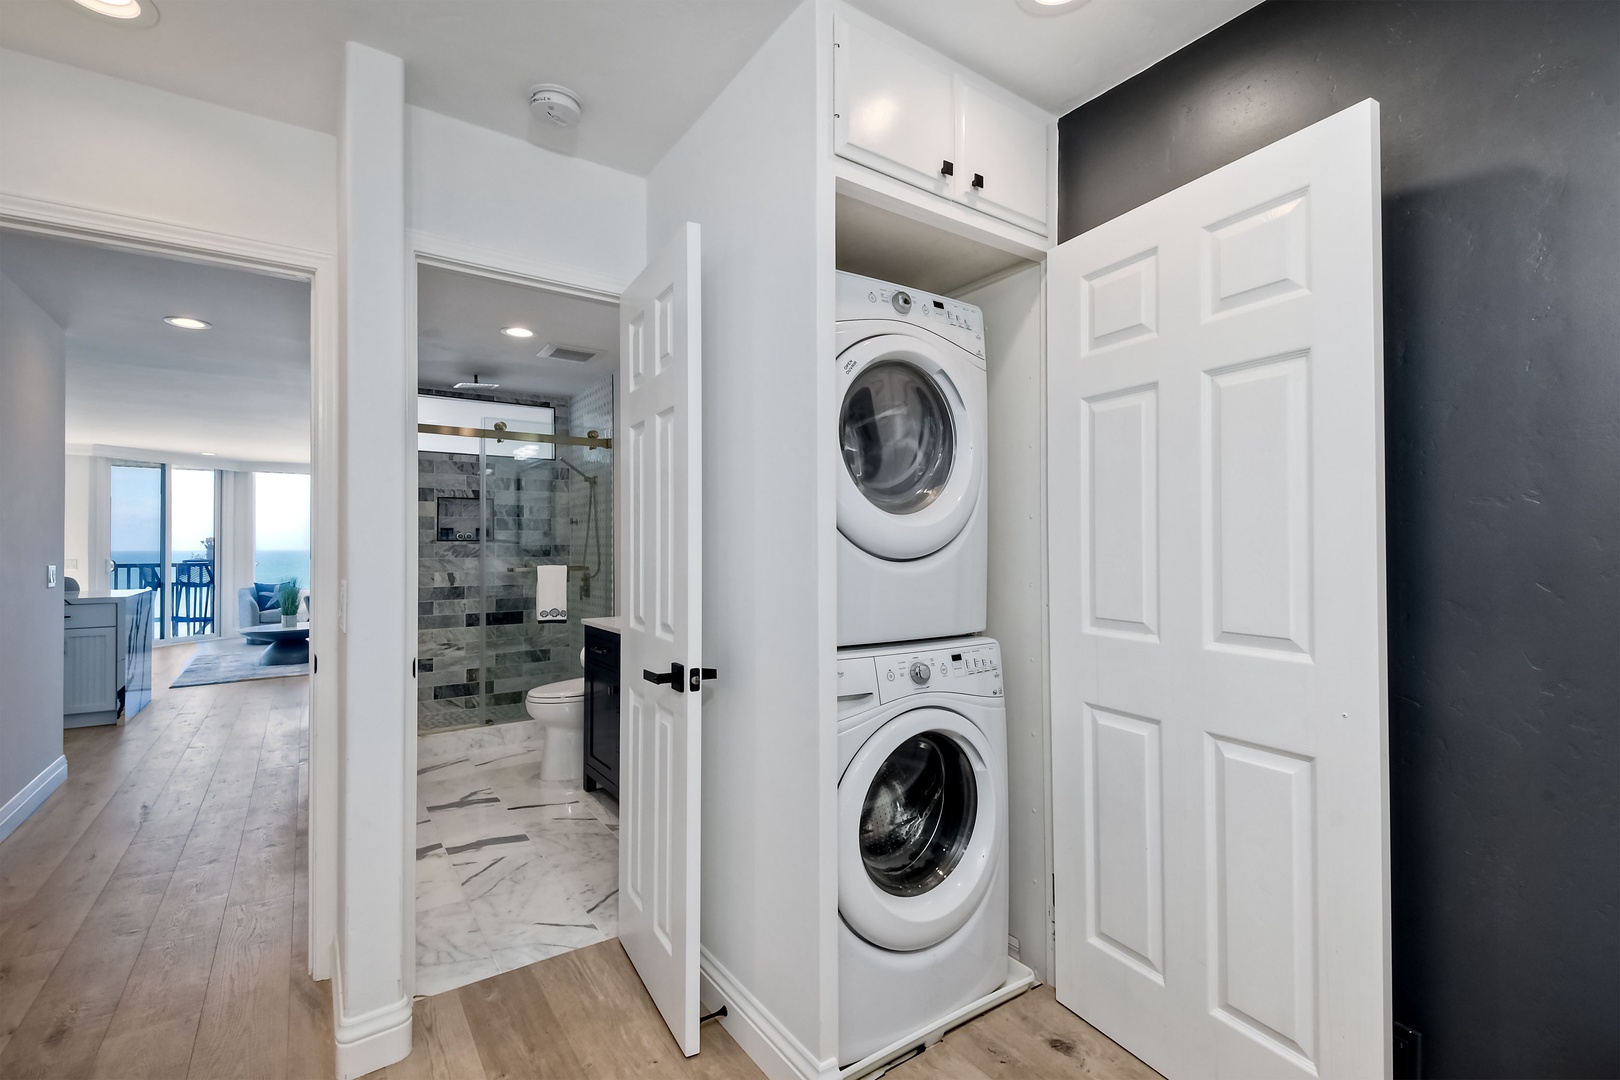 Private laundry is available for your stay, tucked away in a bedroom closet